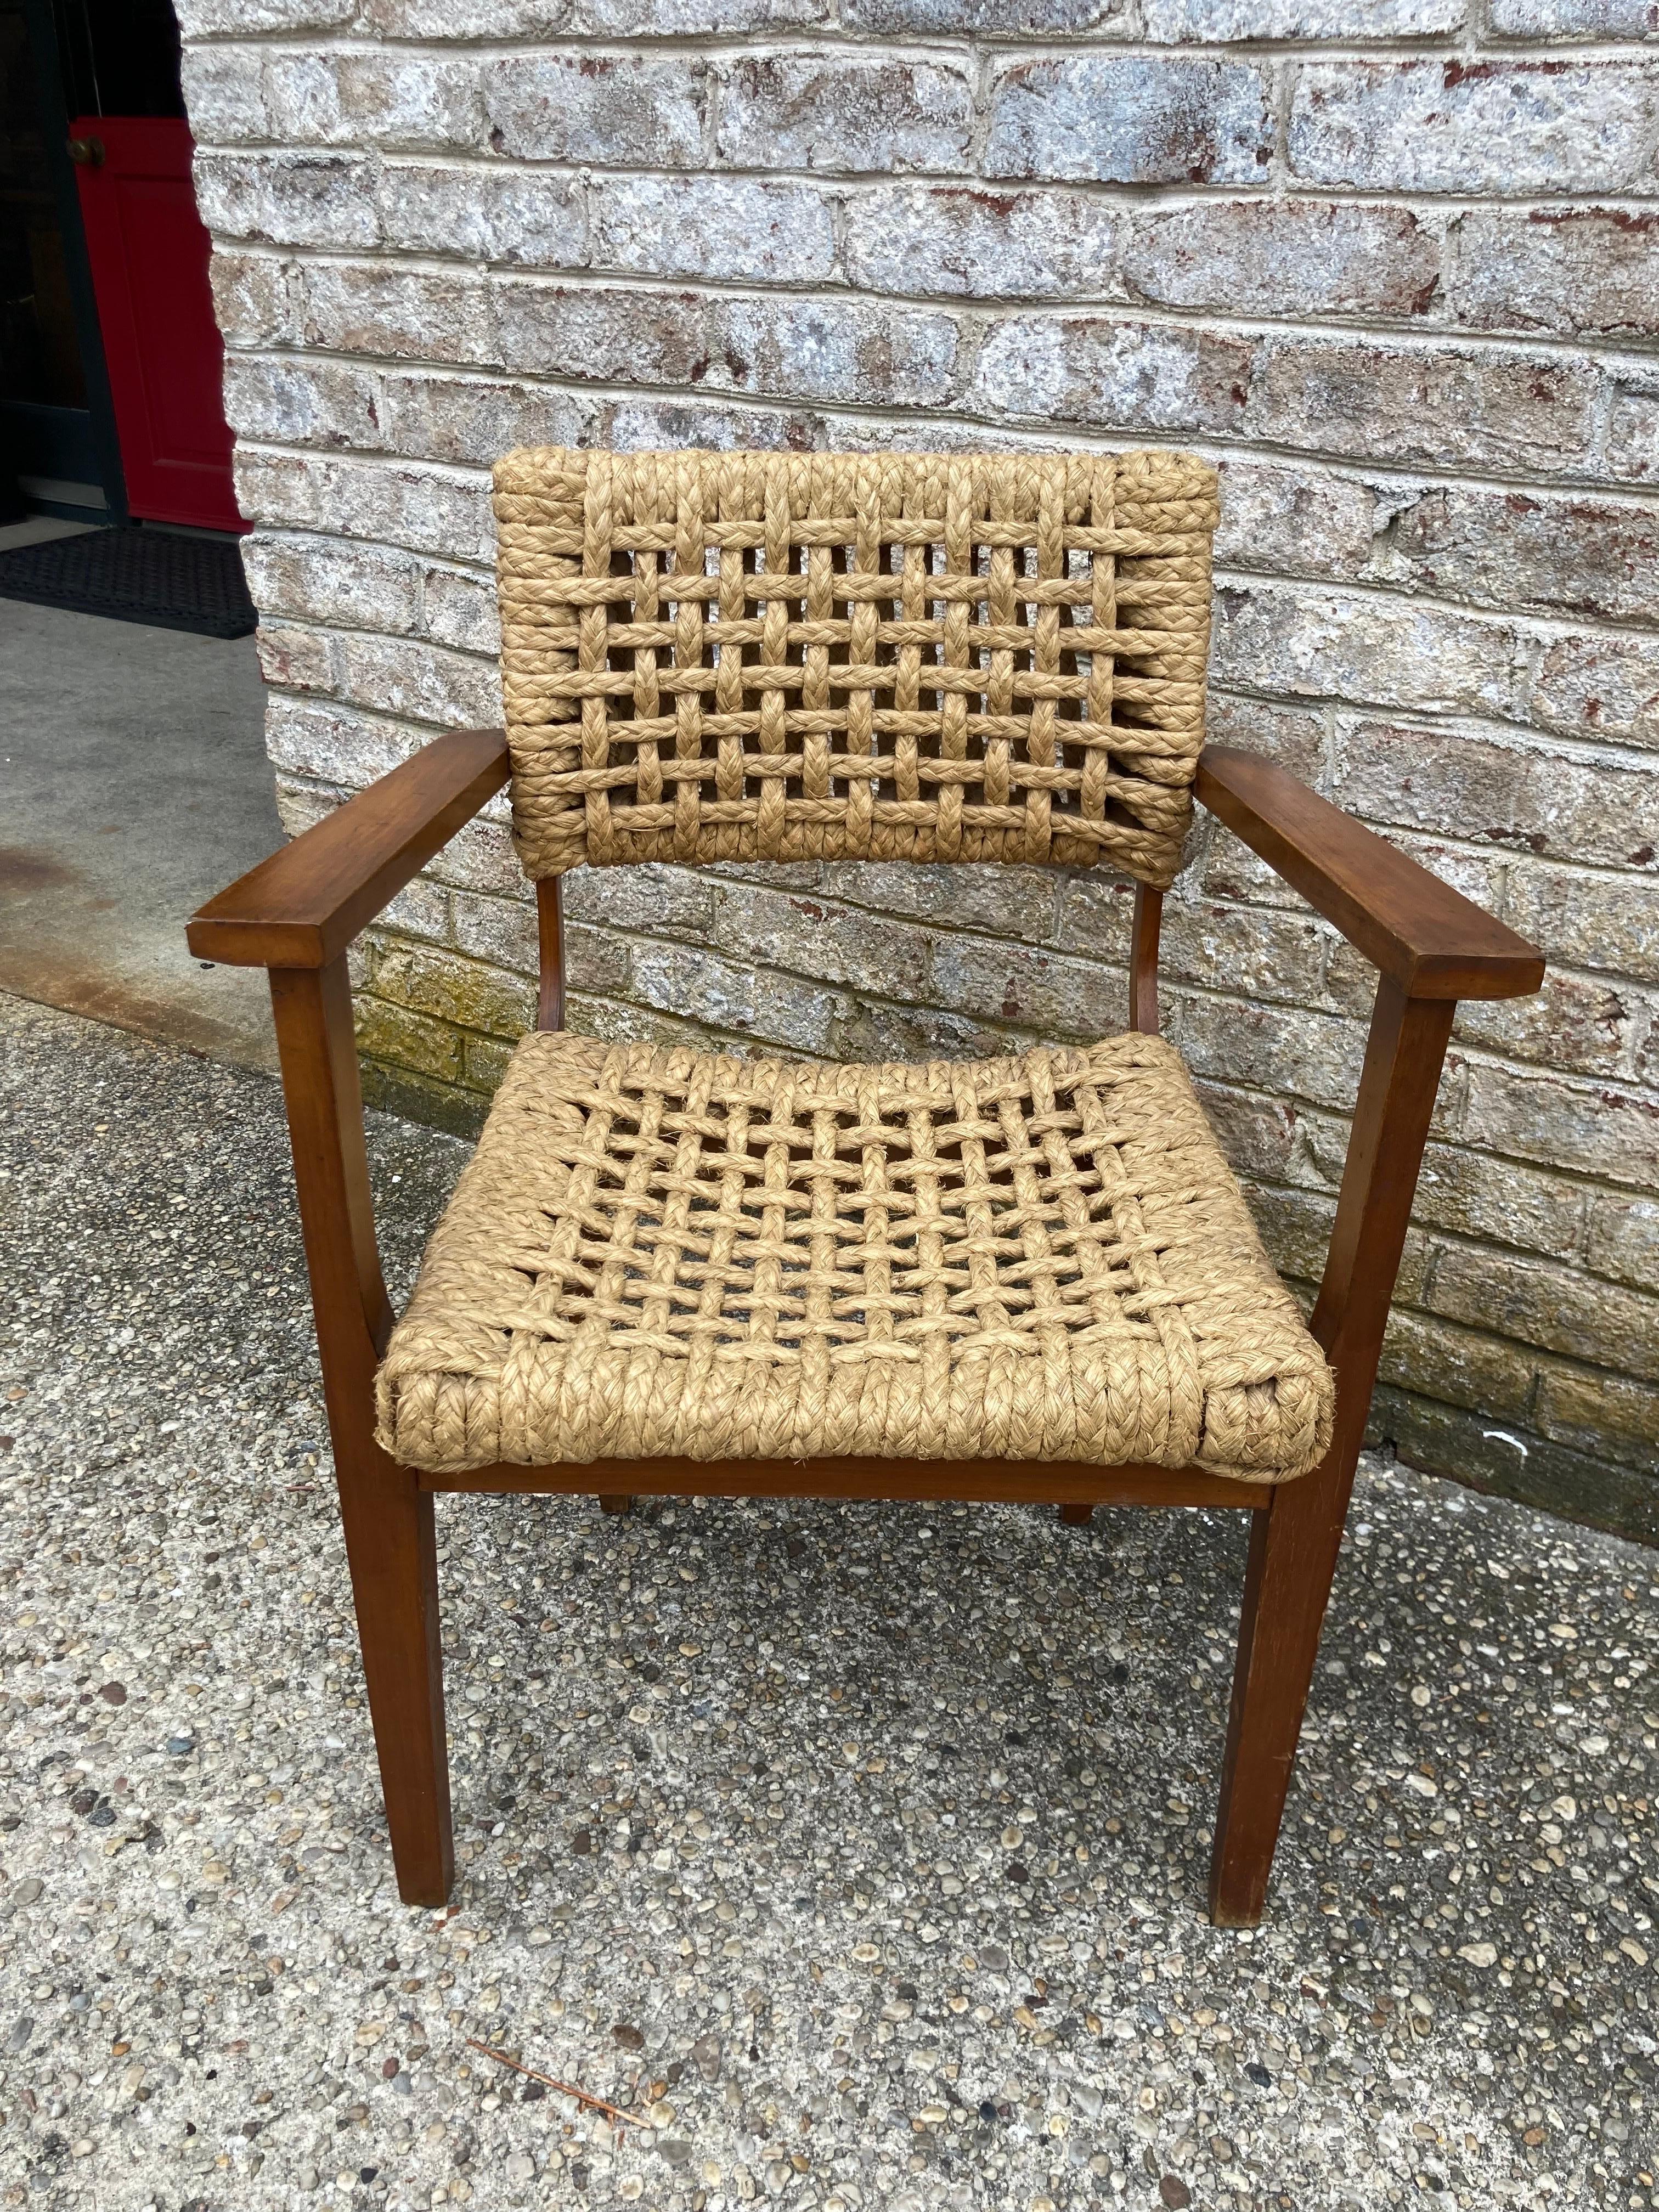 Audoux Minet armchair with abaca woven seat and back.